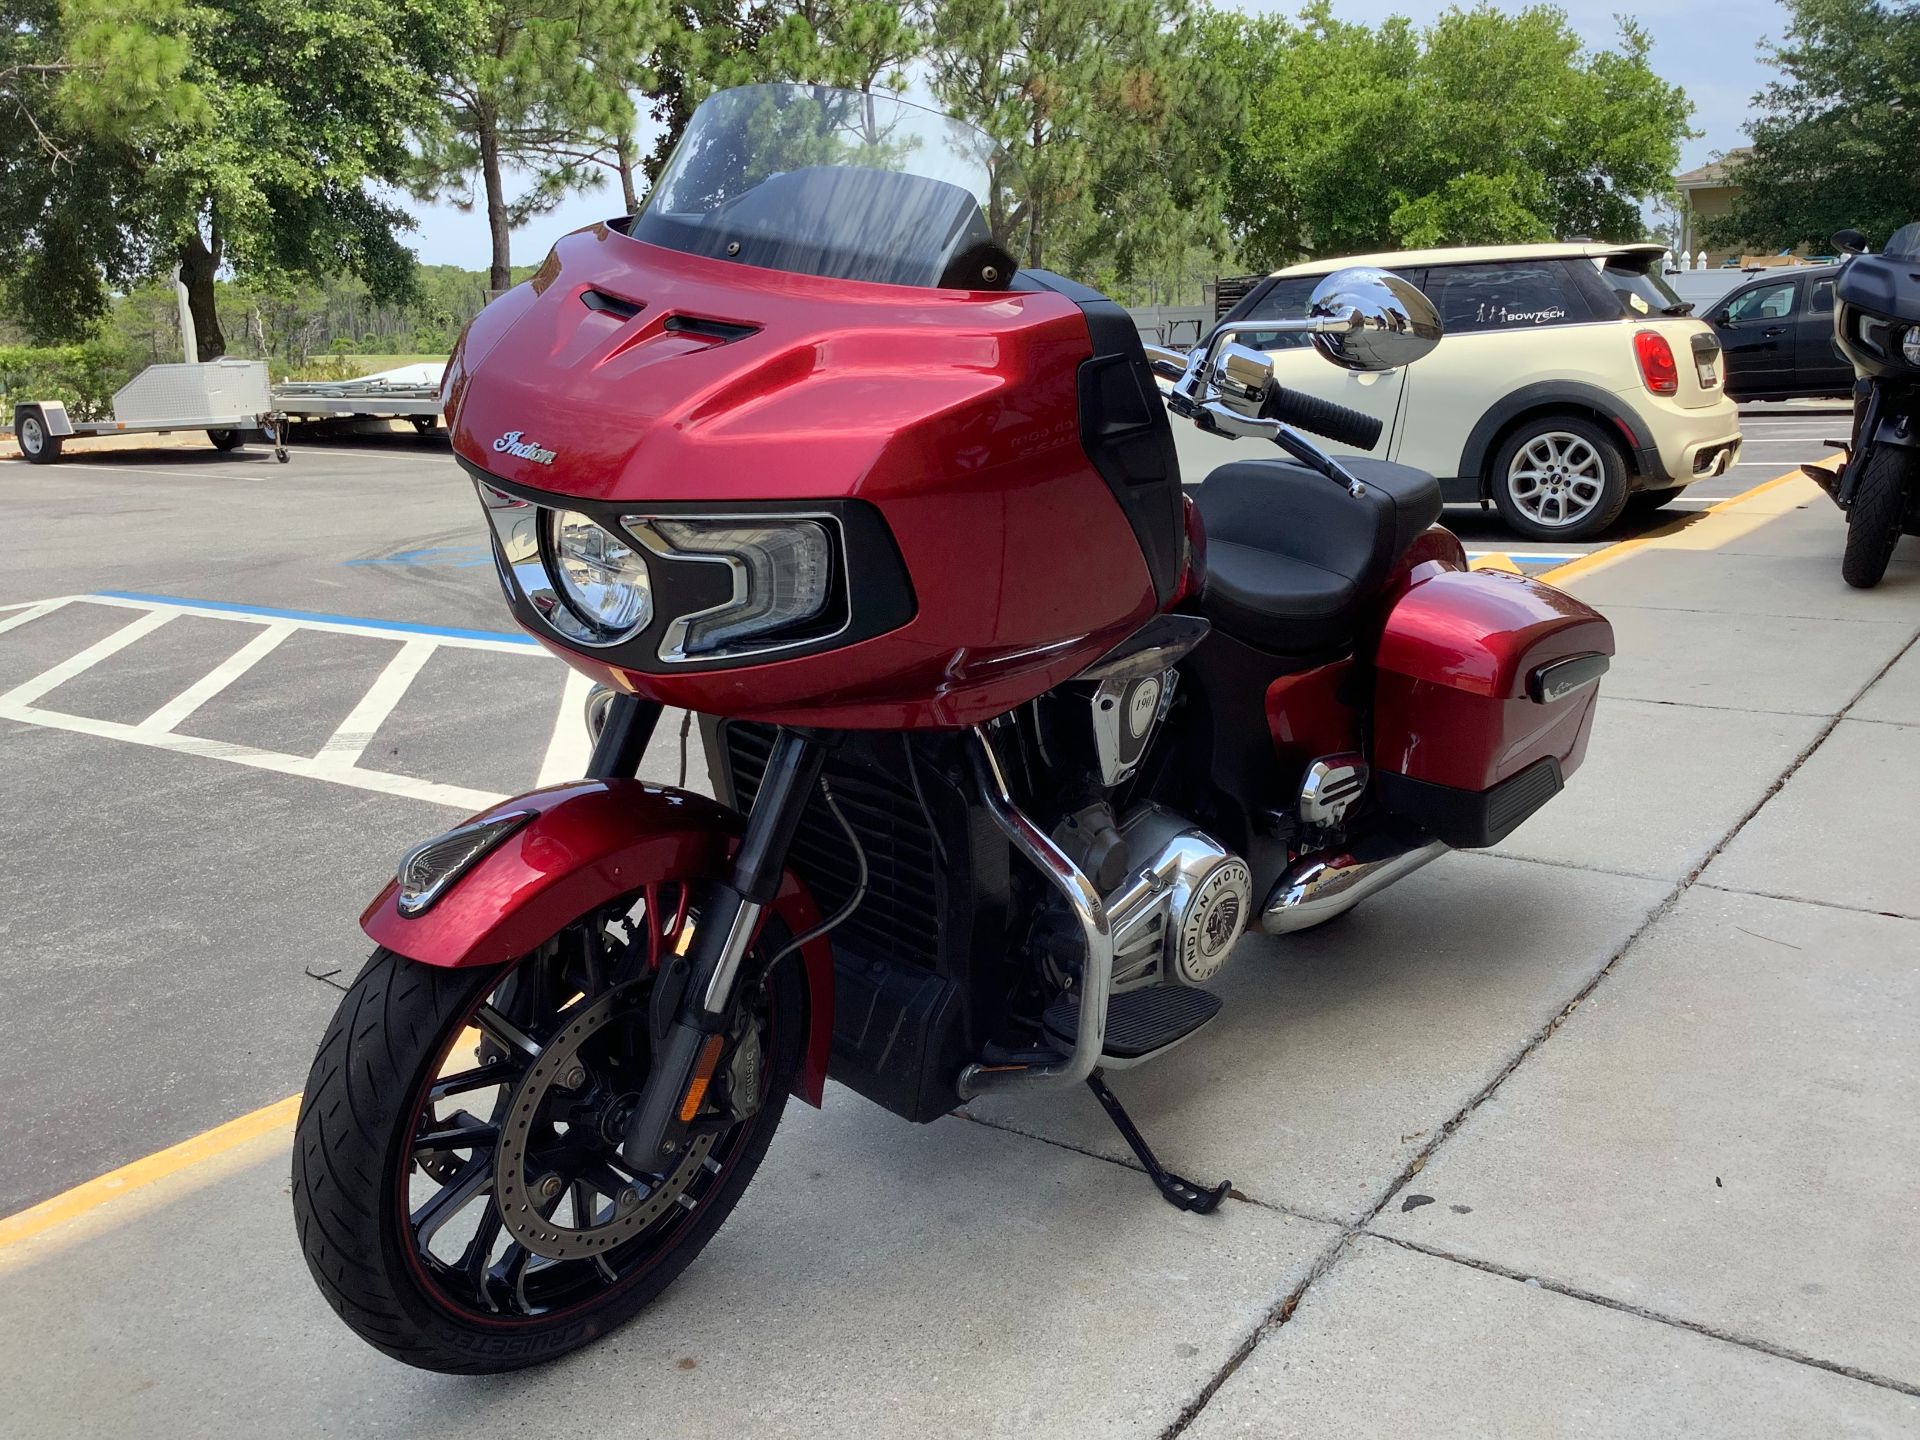 2020 Indian Motorcycle CLALLENGER LIMITED in Panama City Beach, Florida - Photo 5